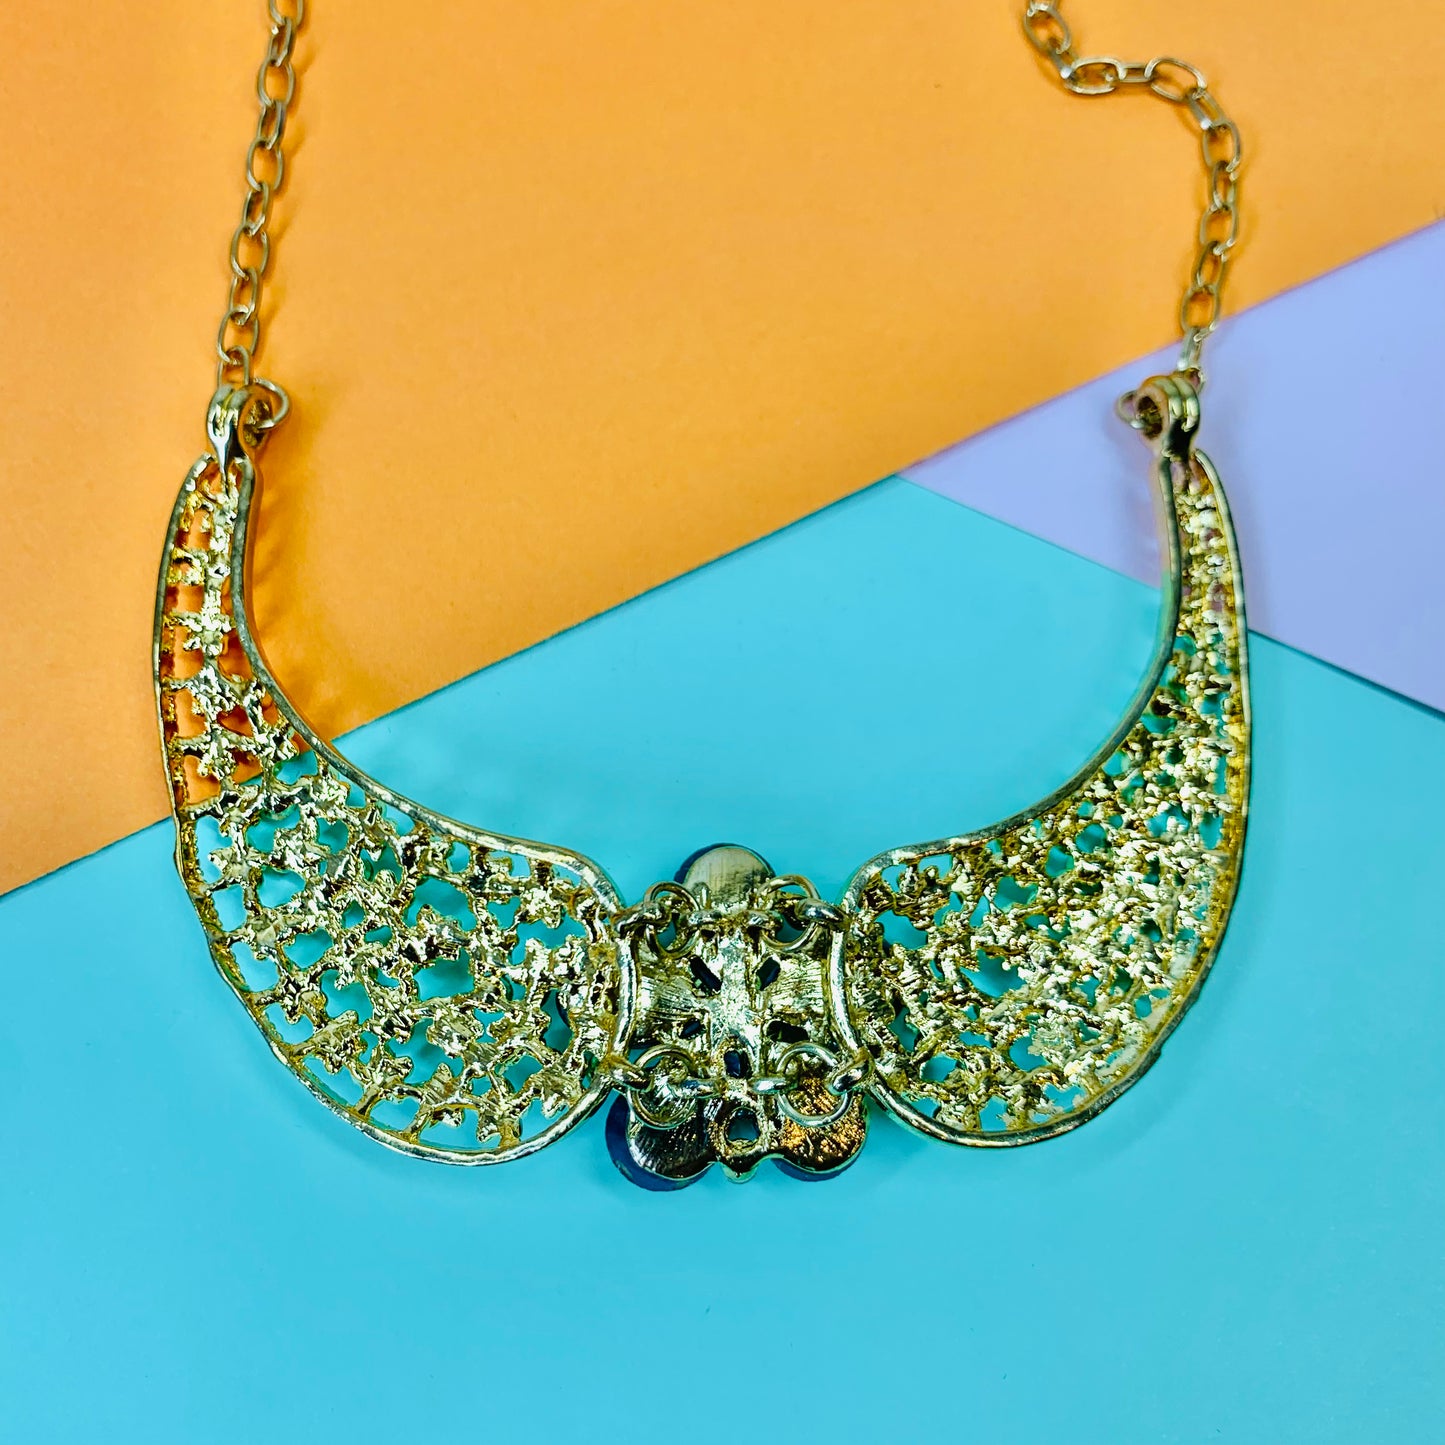 1980s Coro triple plated gold statement necklace with daisy crystals pendant and rhinestones